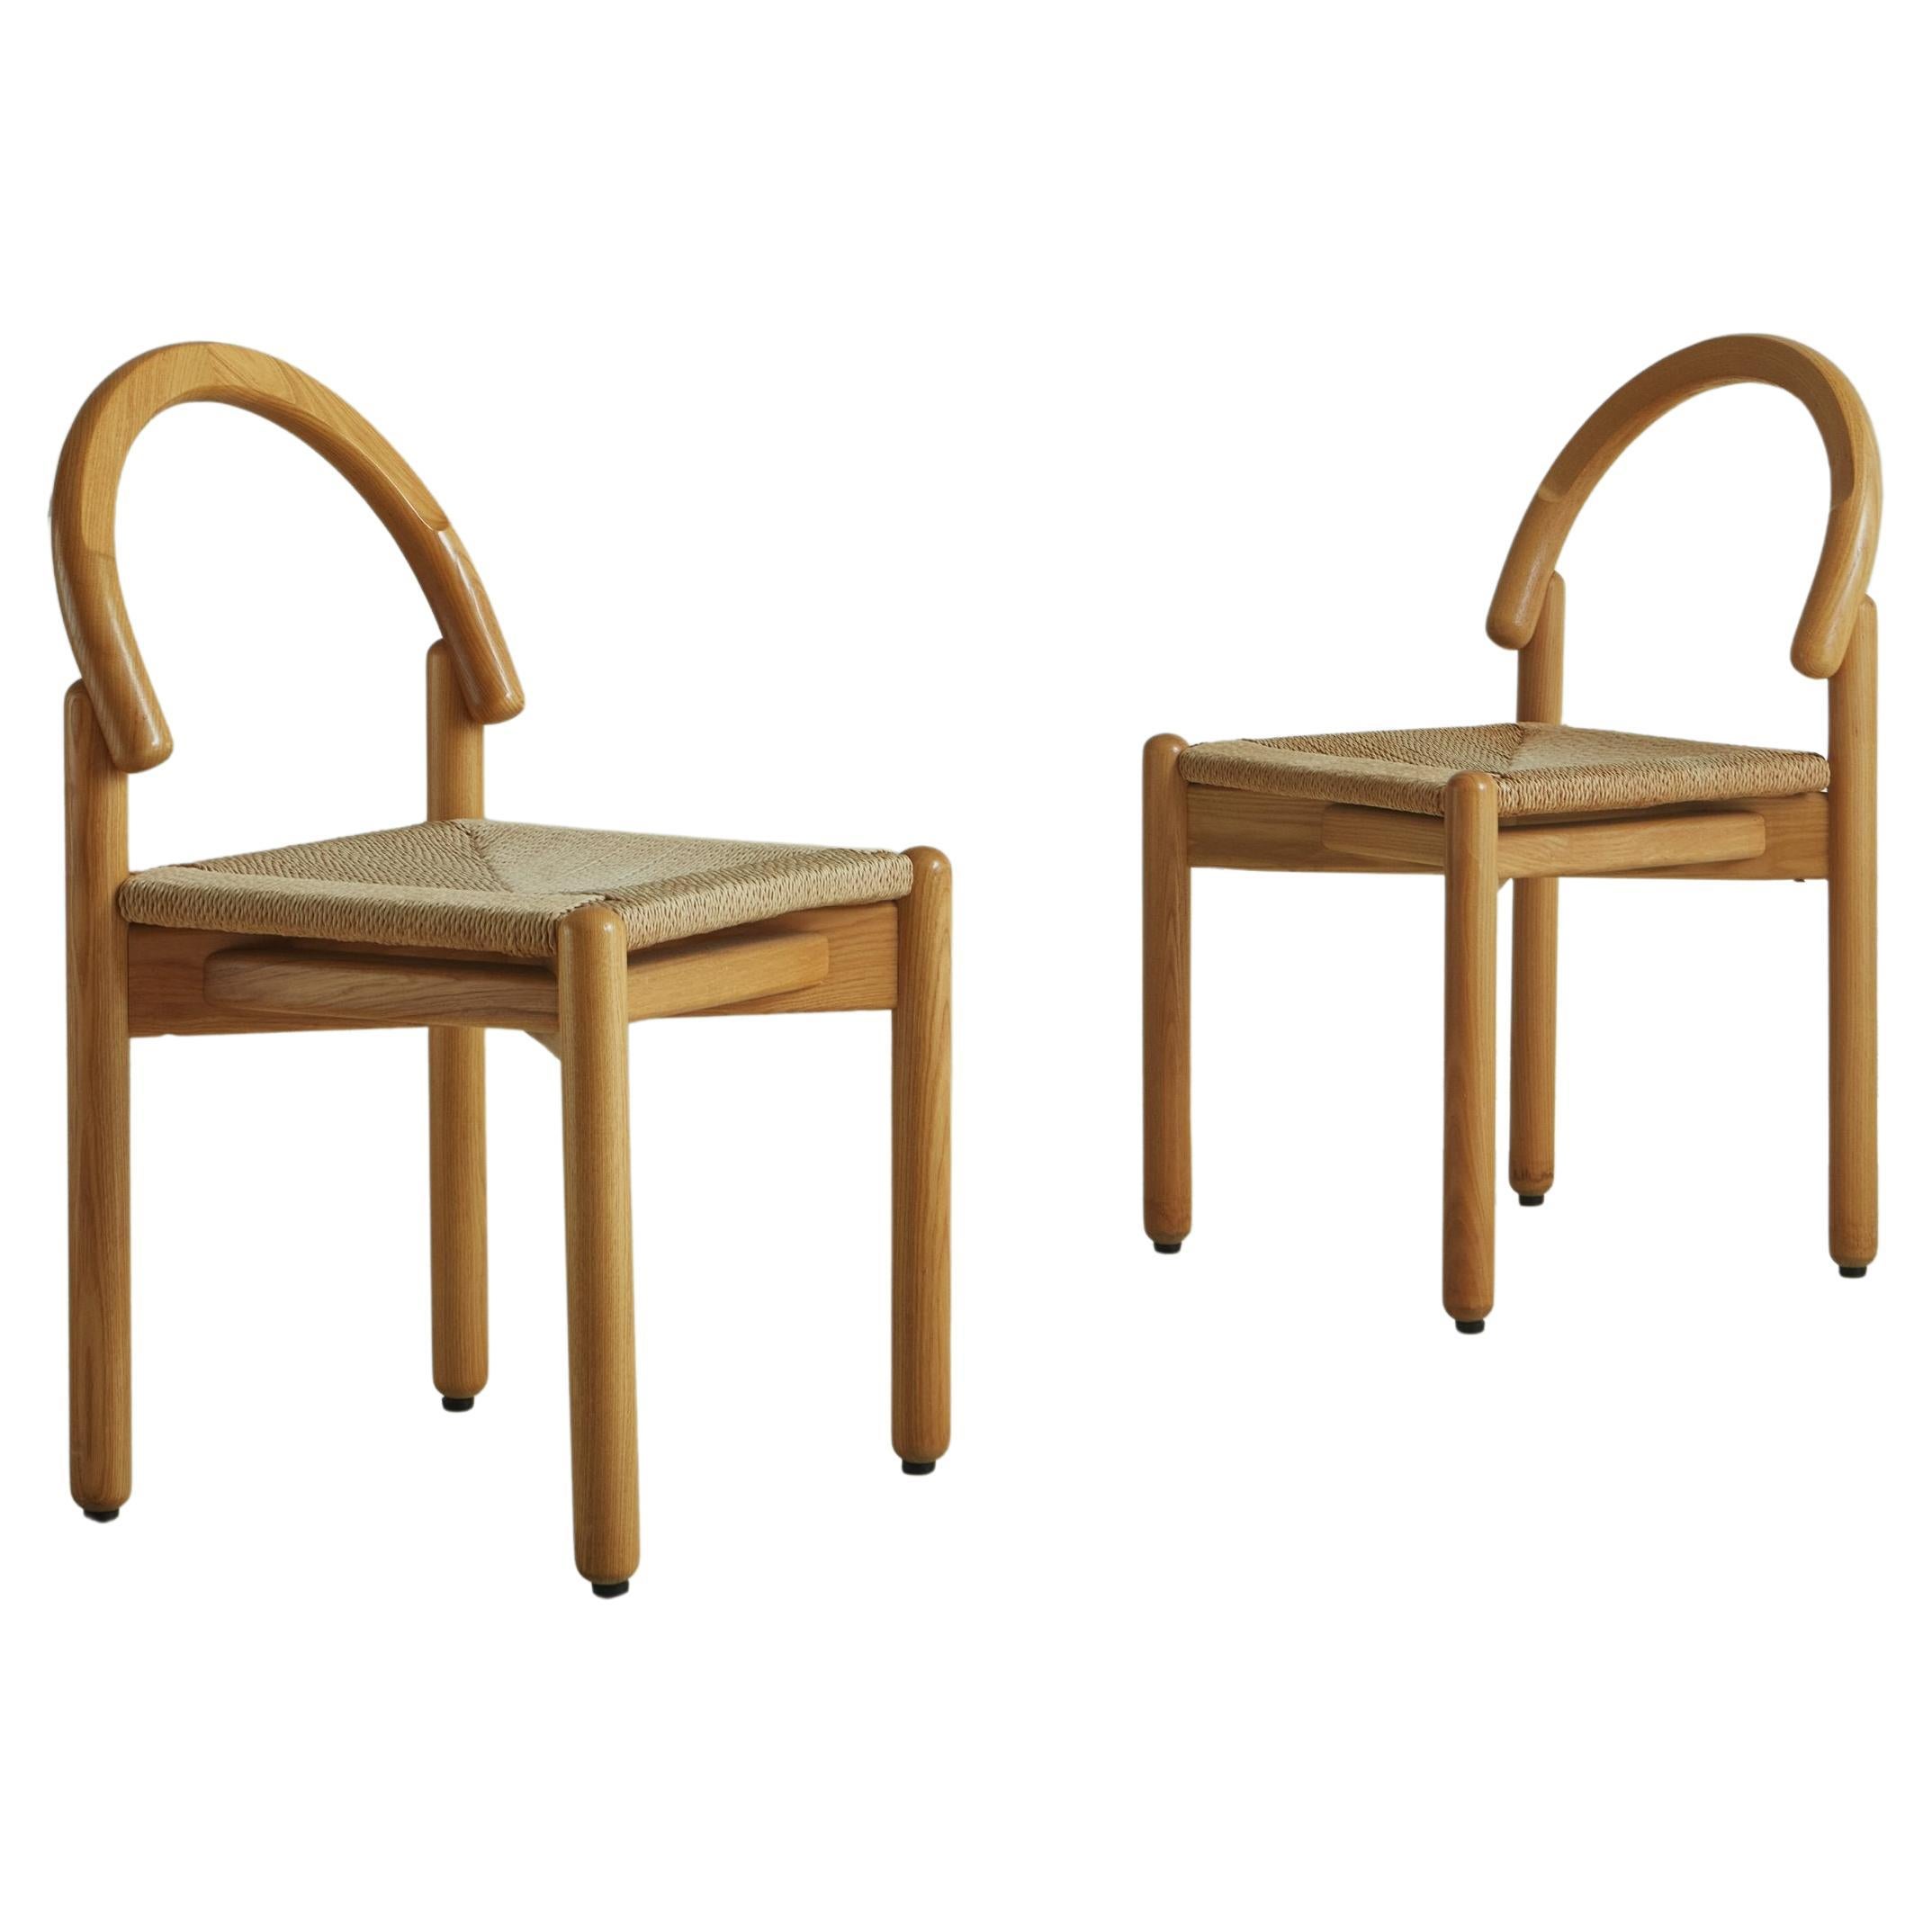 A set of 6 Mid Century dining chairs attributed to Argentinian designer Alberto Churba (b.1932). These chairs have pine wood frames and woven rope seats in a diagonal cross pattern. They feature a dramatically arched seat back, which is attached to